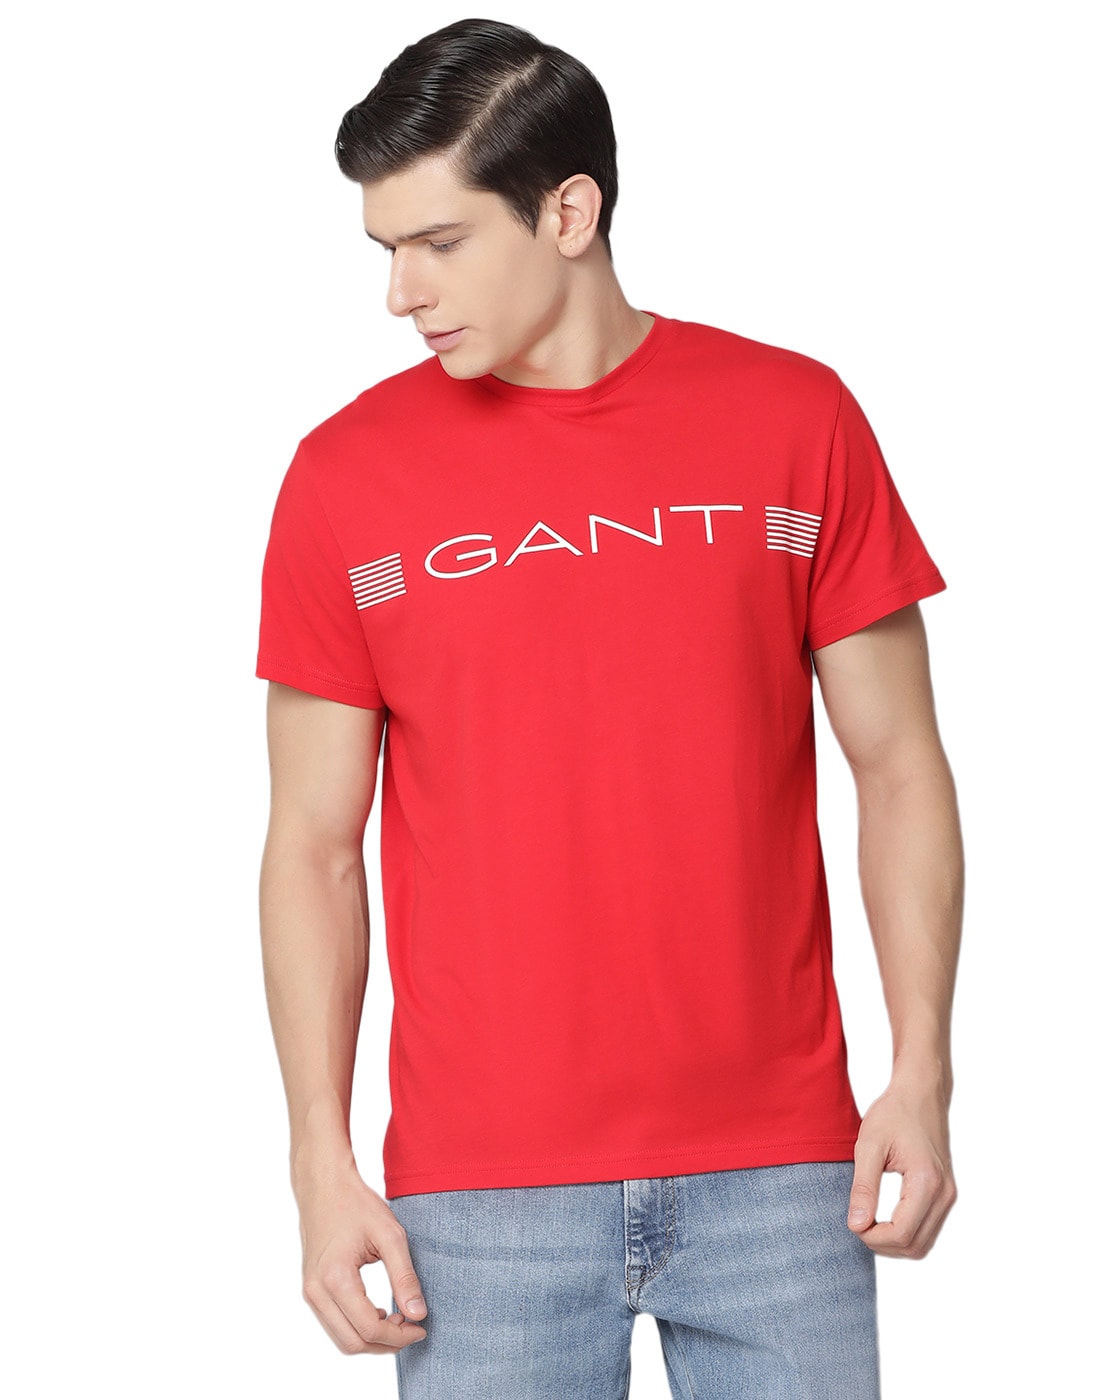 hule Tag ud Australsk person Buy Red Tshirts for Men by Gant Online | Ajio.com